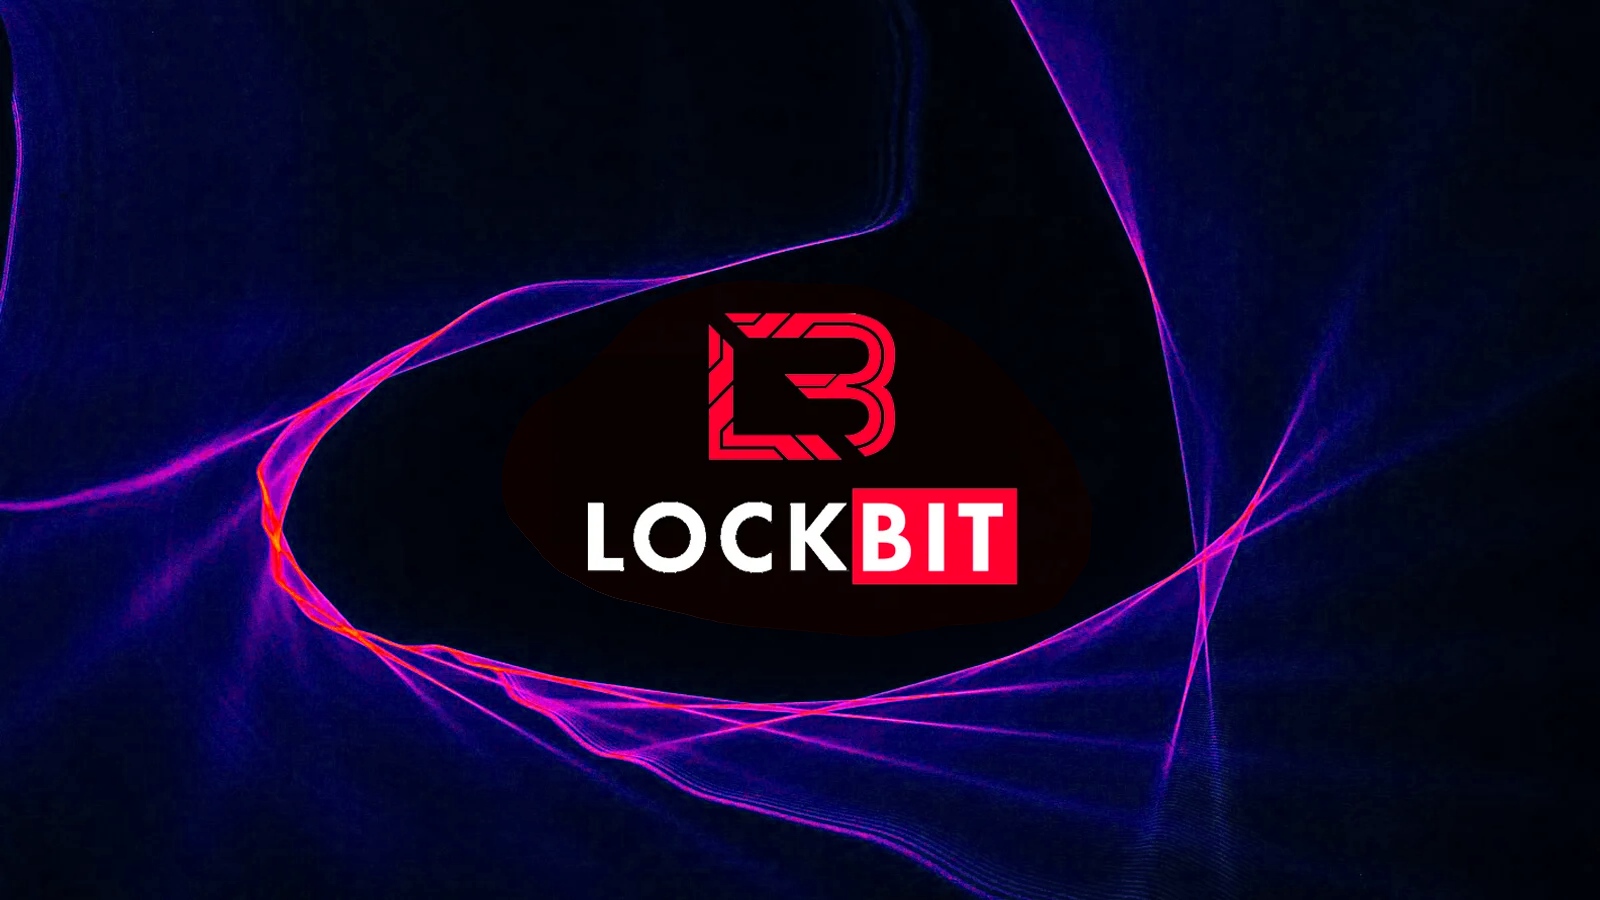 lockbit-ransomware-gang-claims-cyberattack-on-indian-broker-motilal-oswal